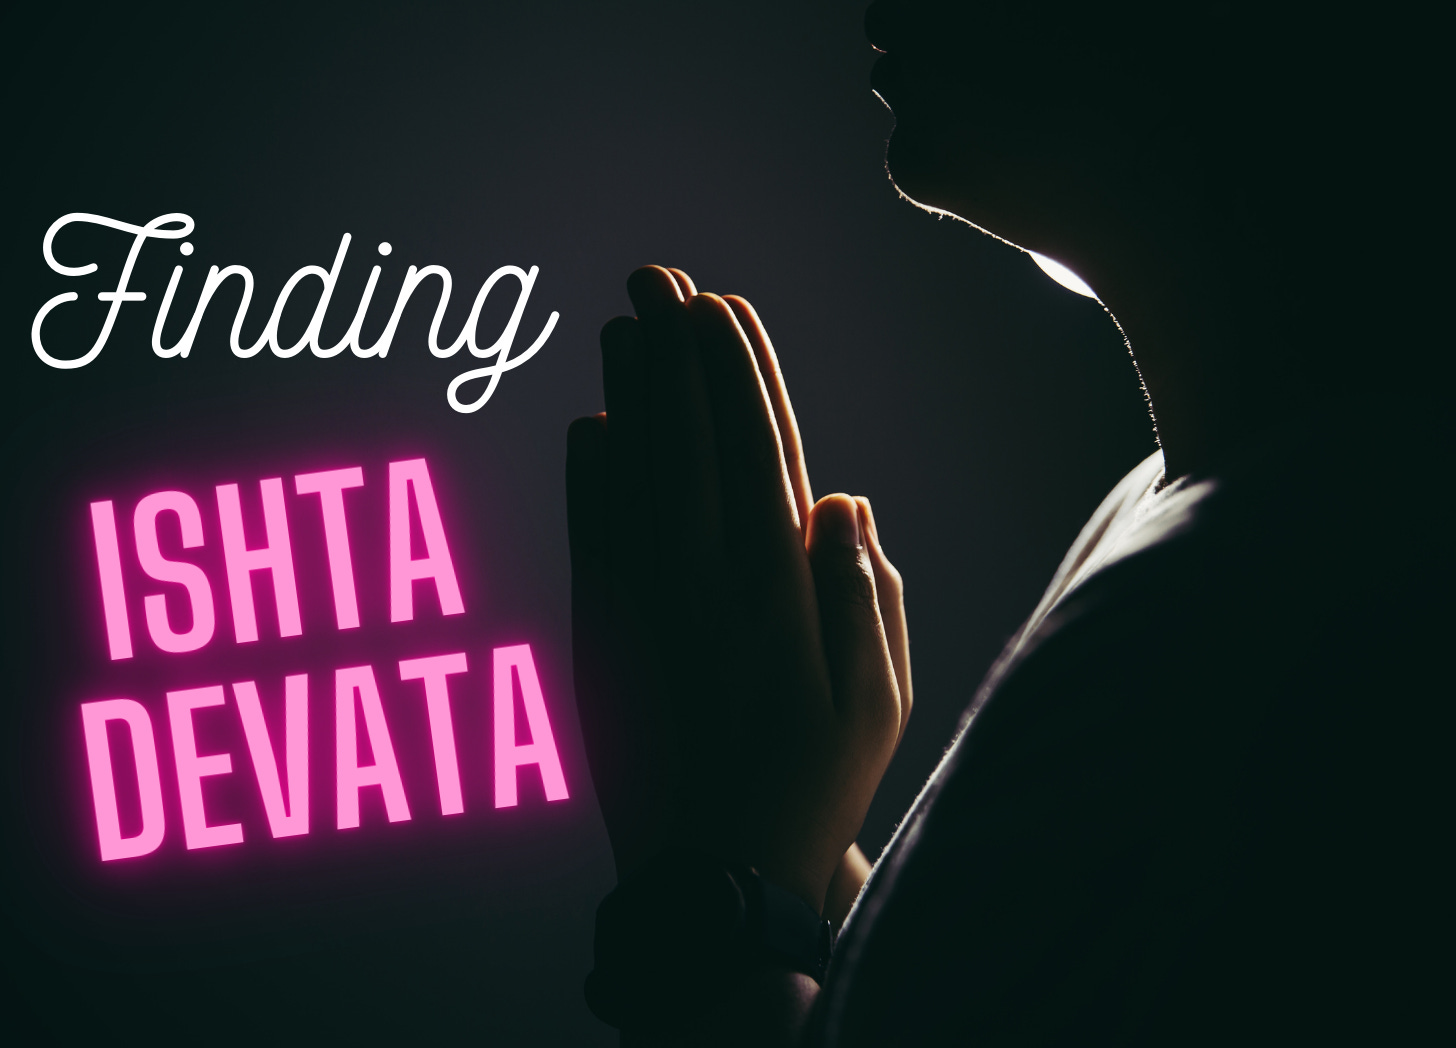 The image shows praying hands. The text written is "Finding Ishta Devata"